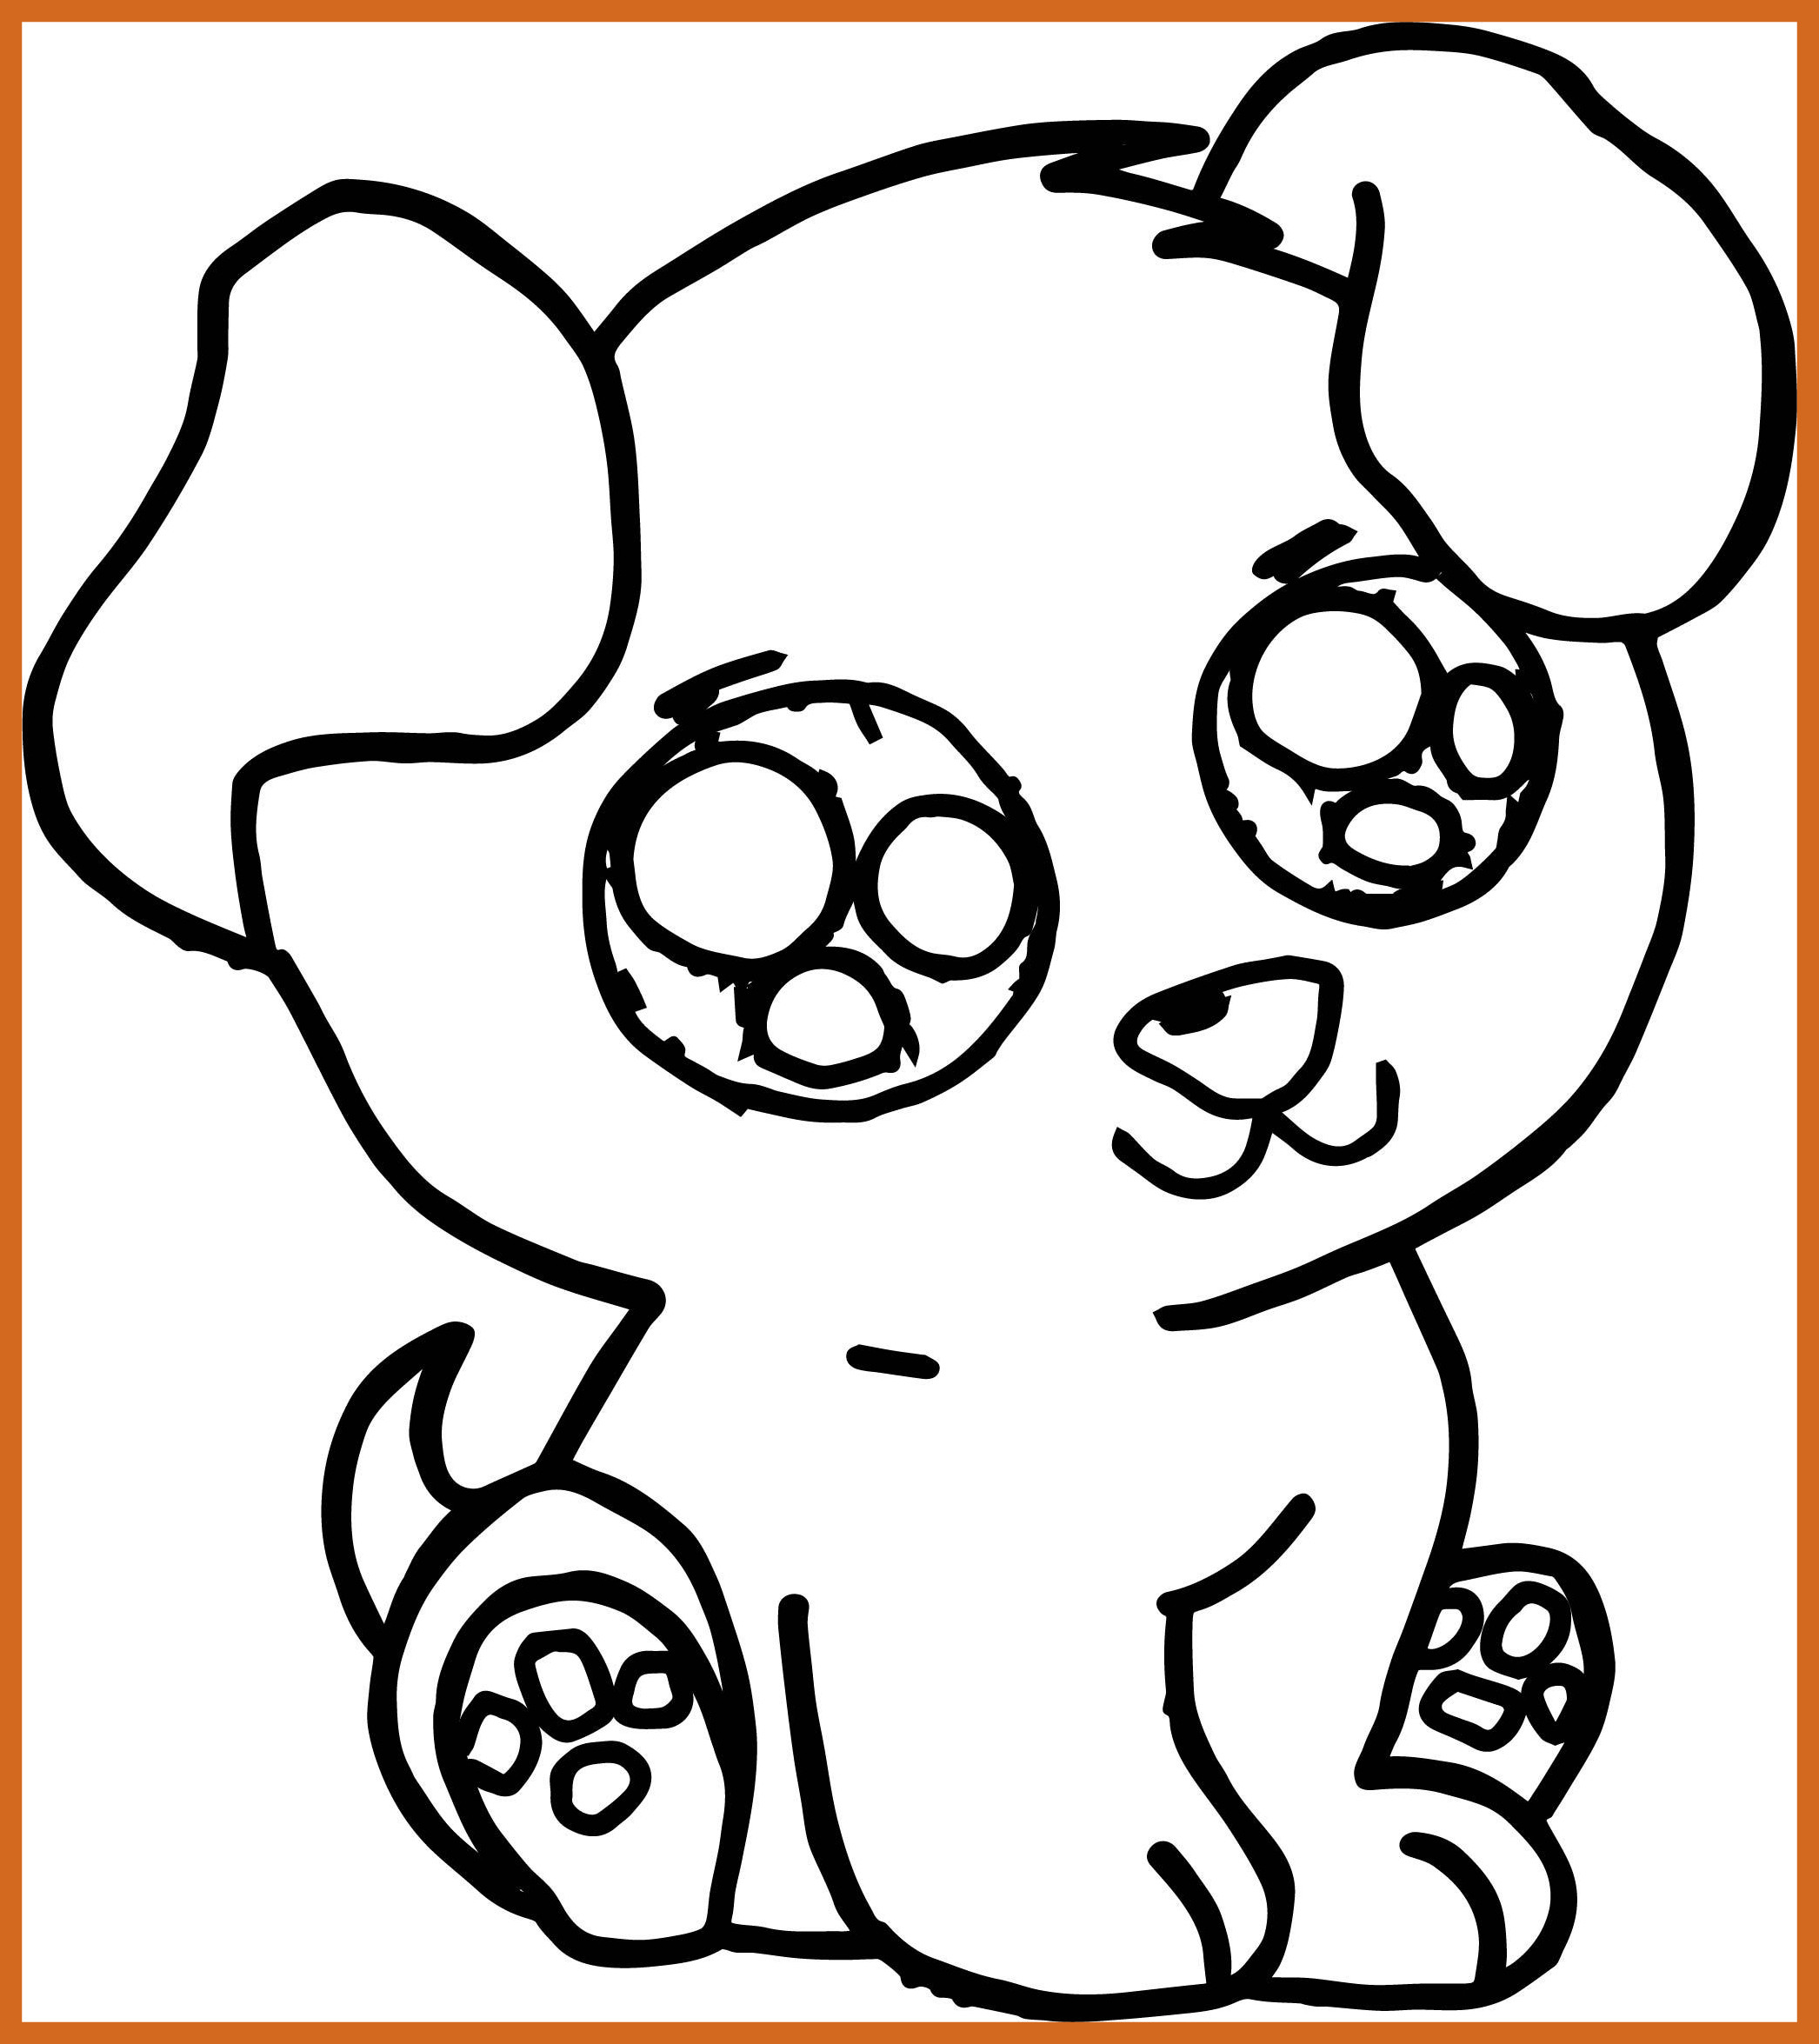 Dog Coloring Pages at GetColorings.com | Free printable colorings pages ...